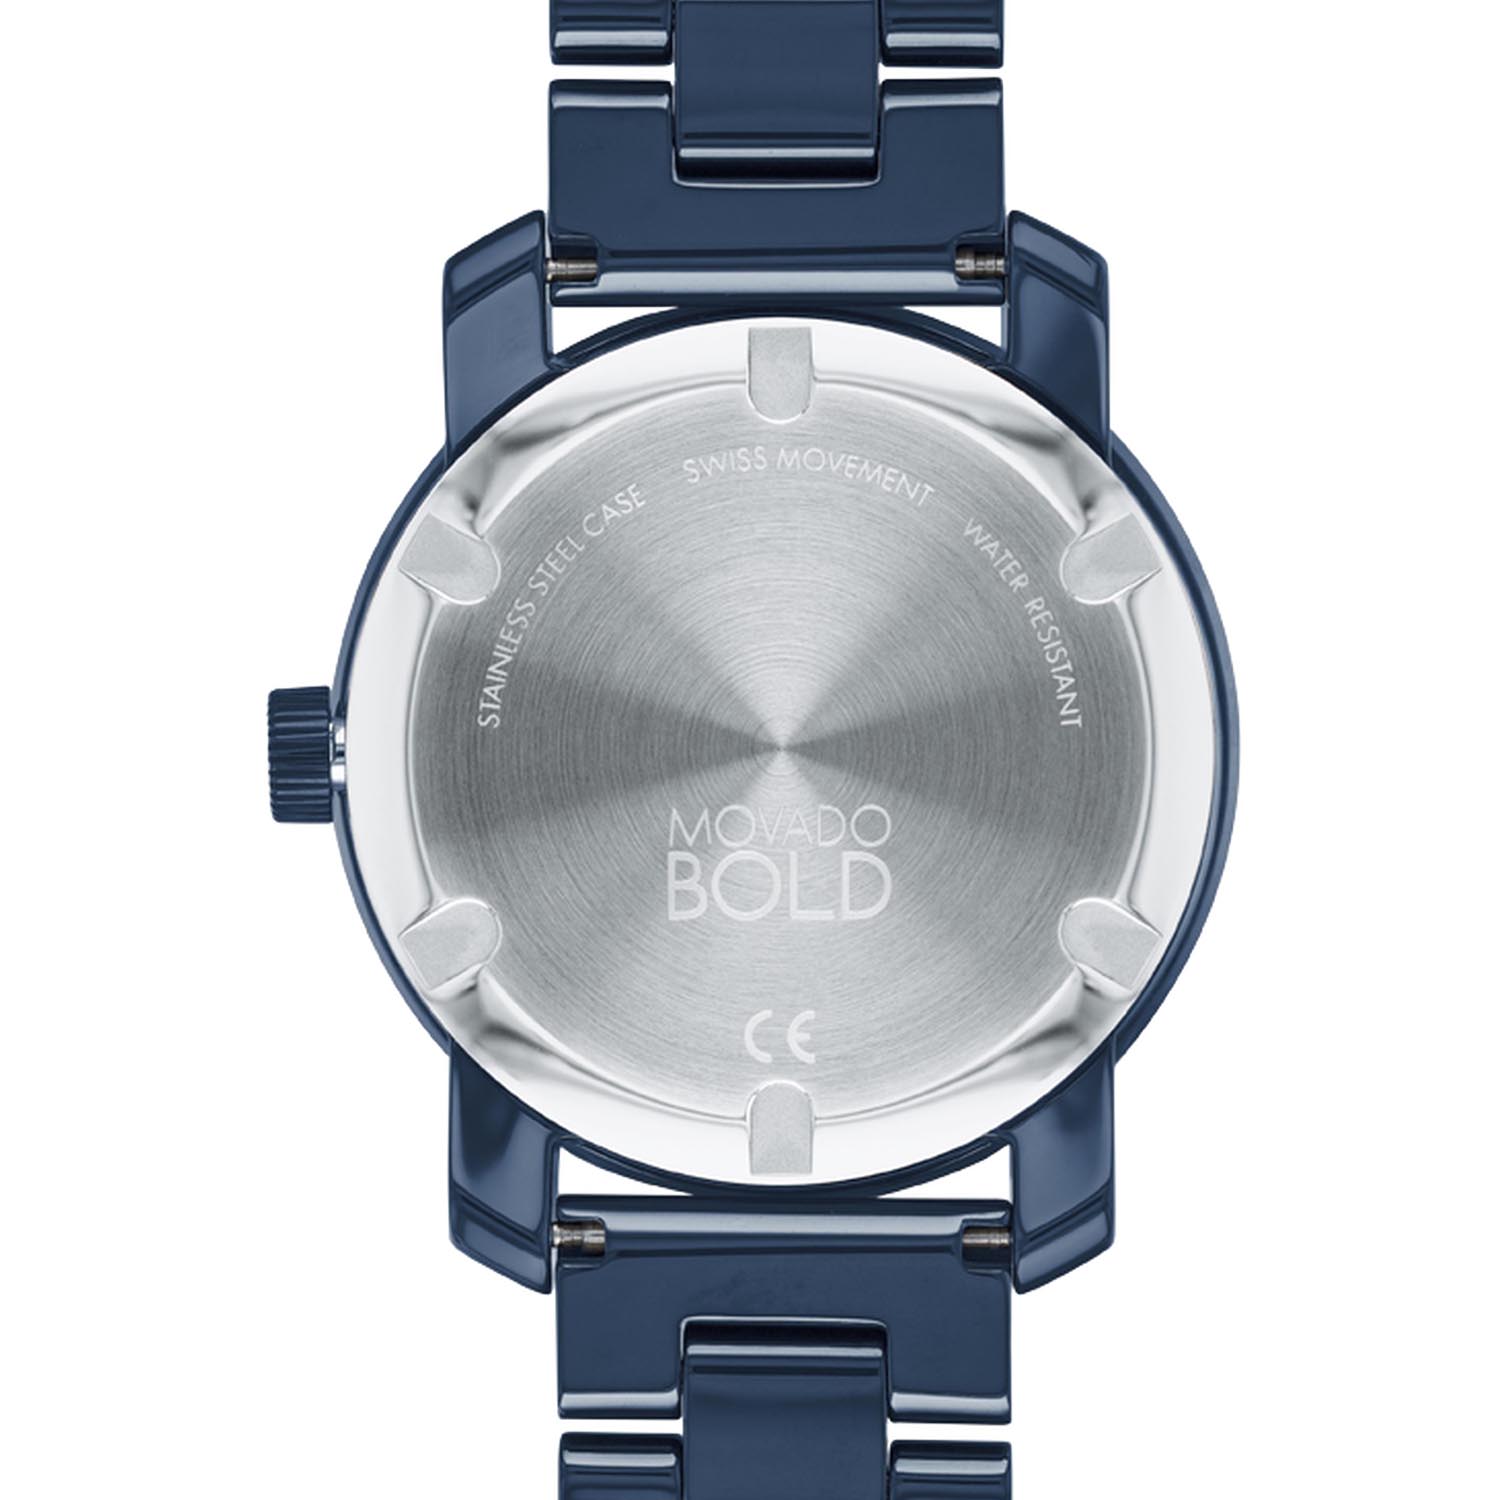 You Can't Go Wrong Adding This Movado Watch To Your Collection - Men's  Journal